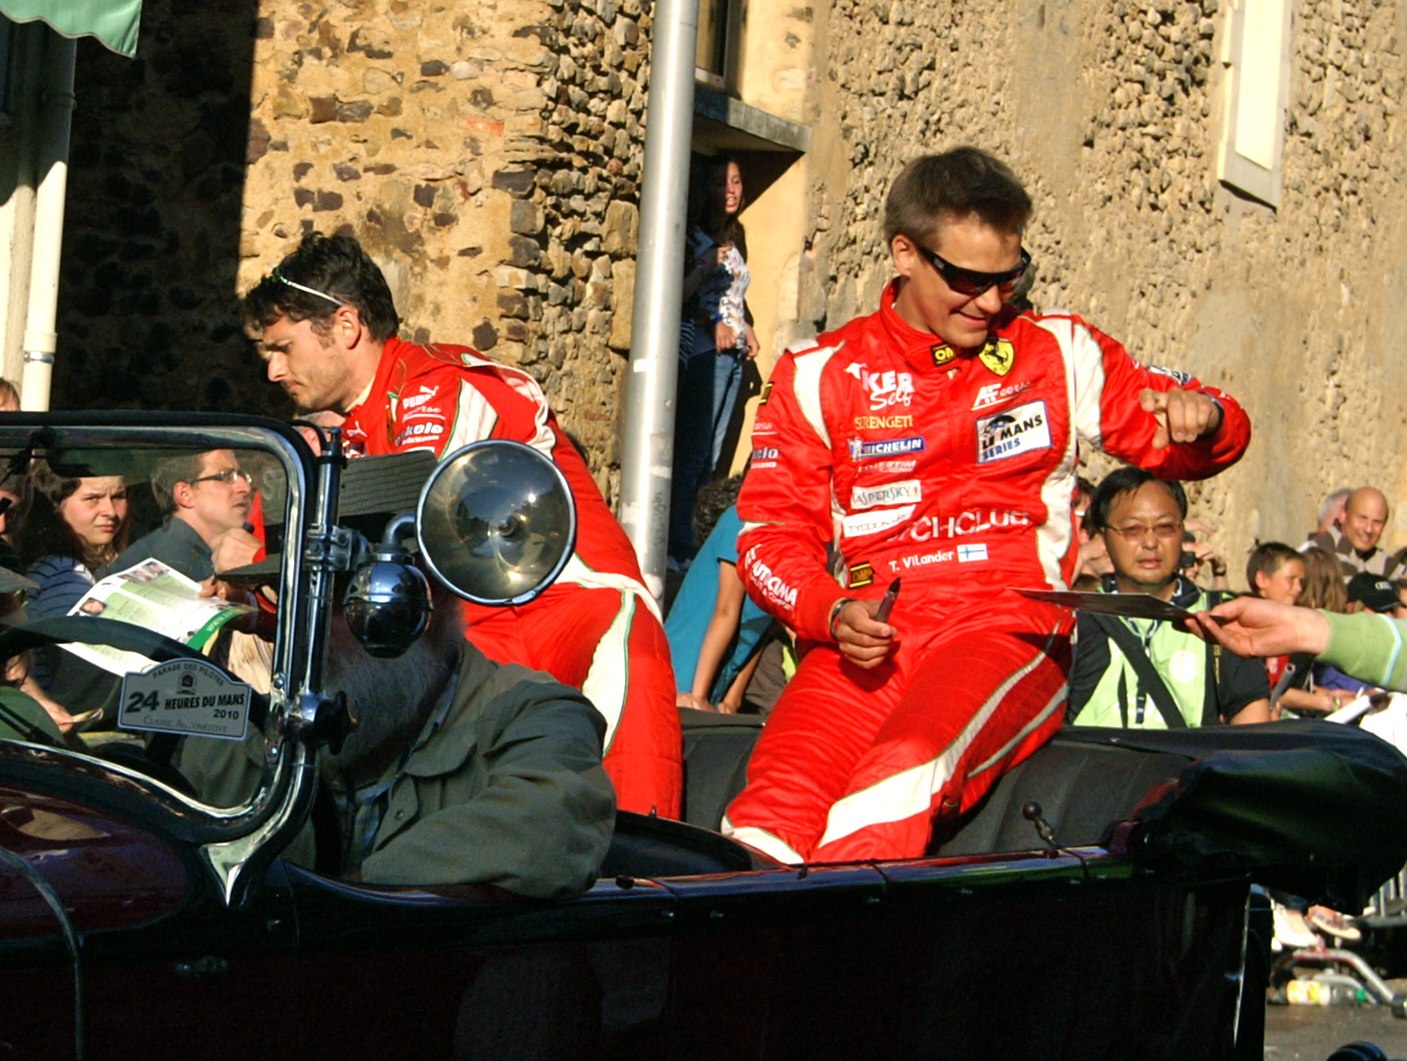 the two men in red are talking on the back of a car